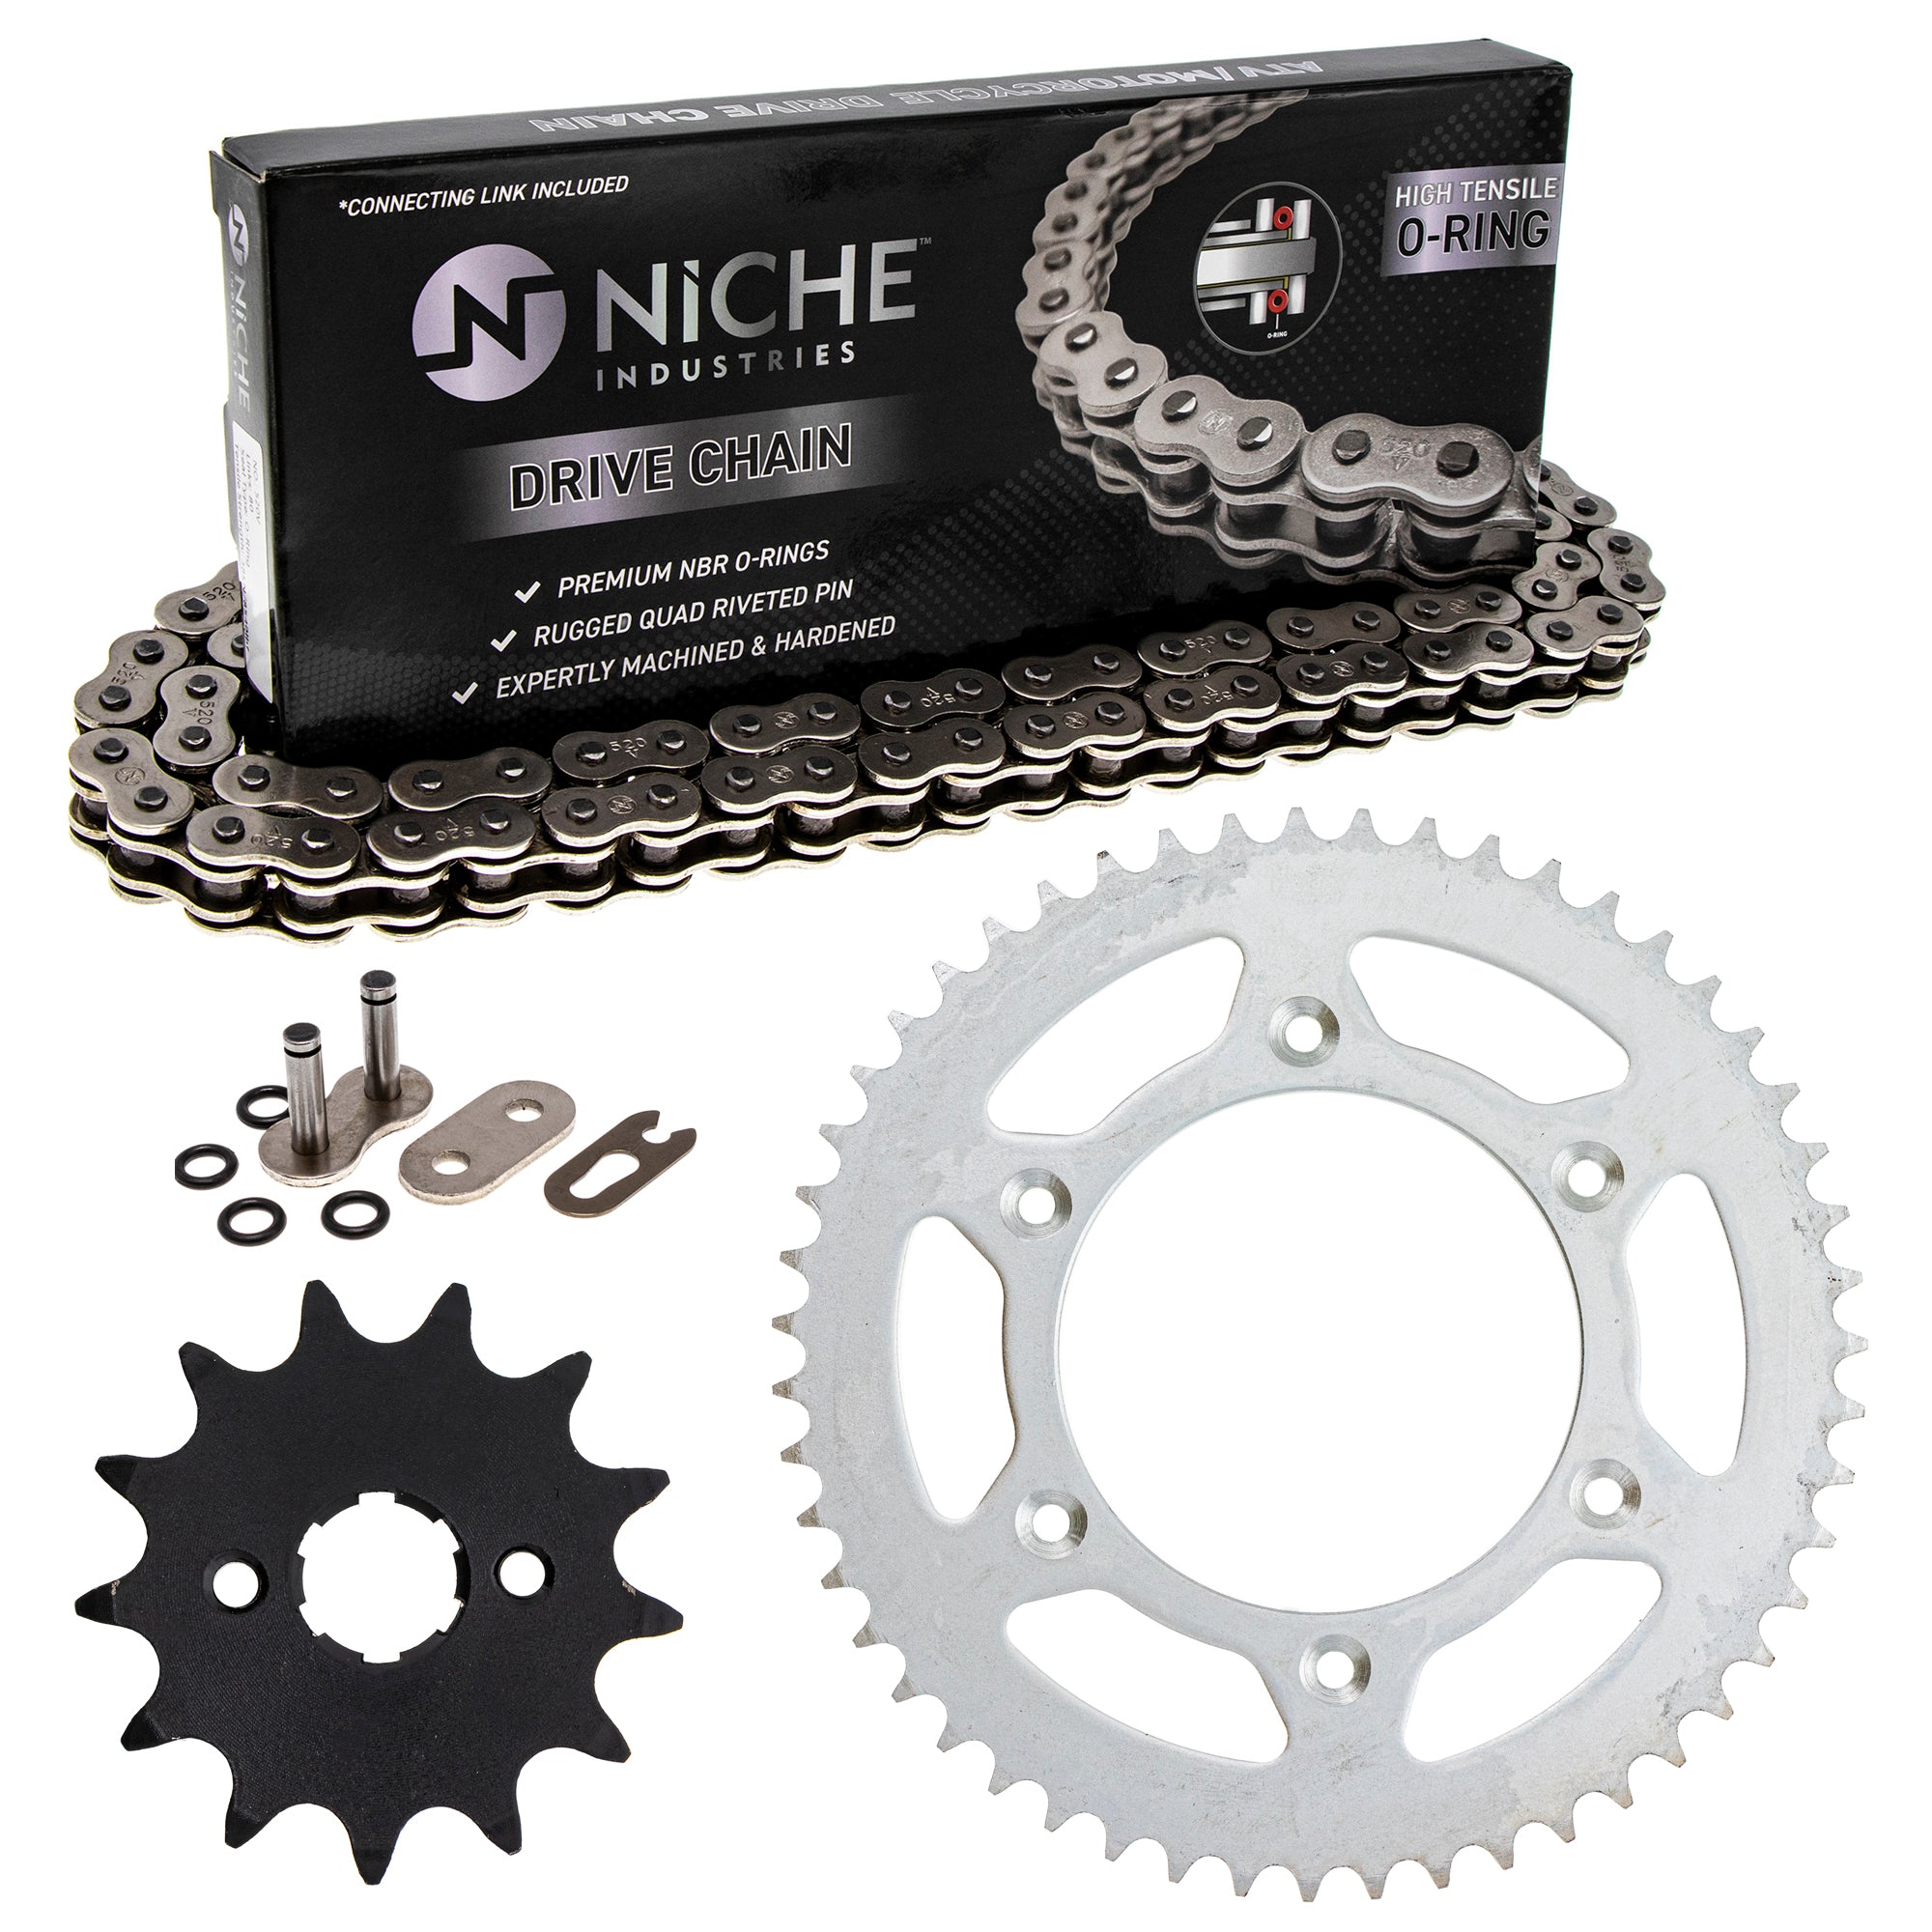 Drive Sprockets & Chain Kit for zOTHER JT Sprocket Honda Elsinore CR125R 40530-KCY-652 NICHE MK1004261